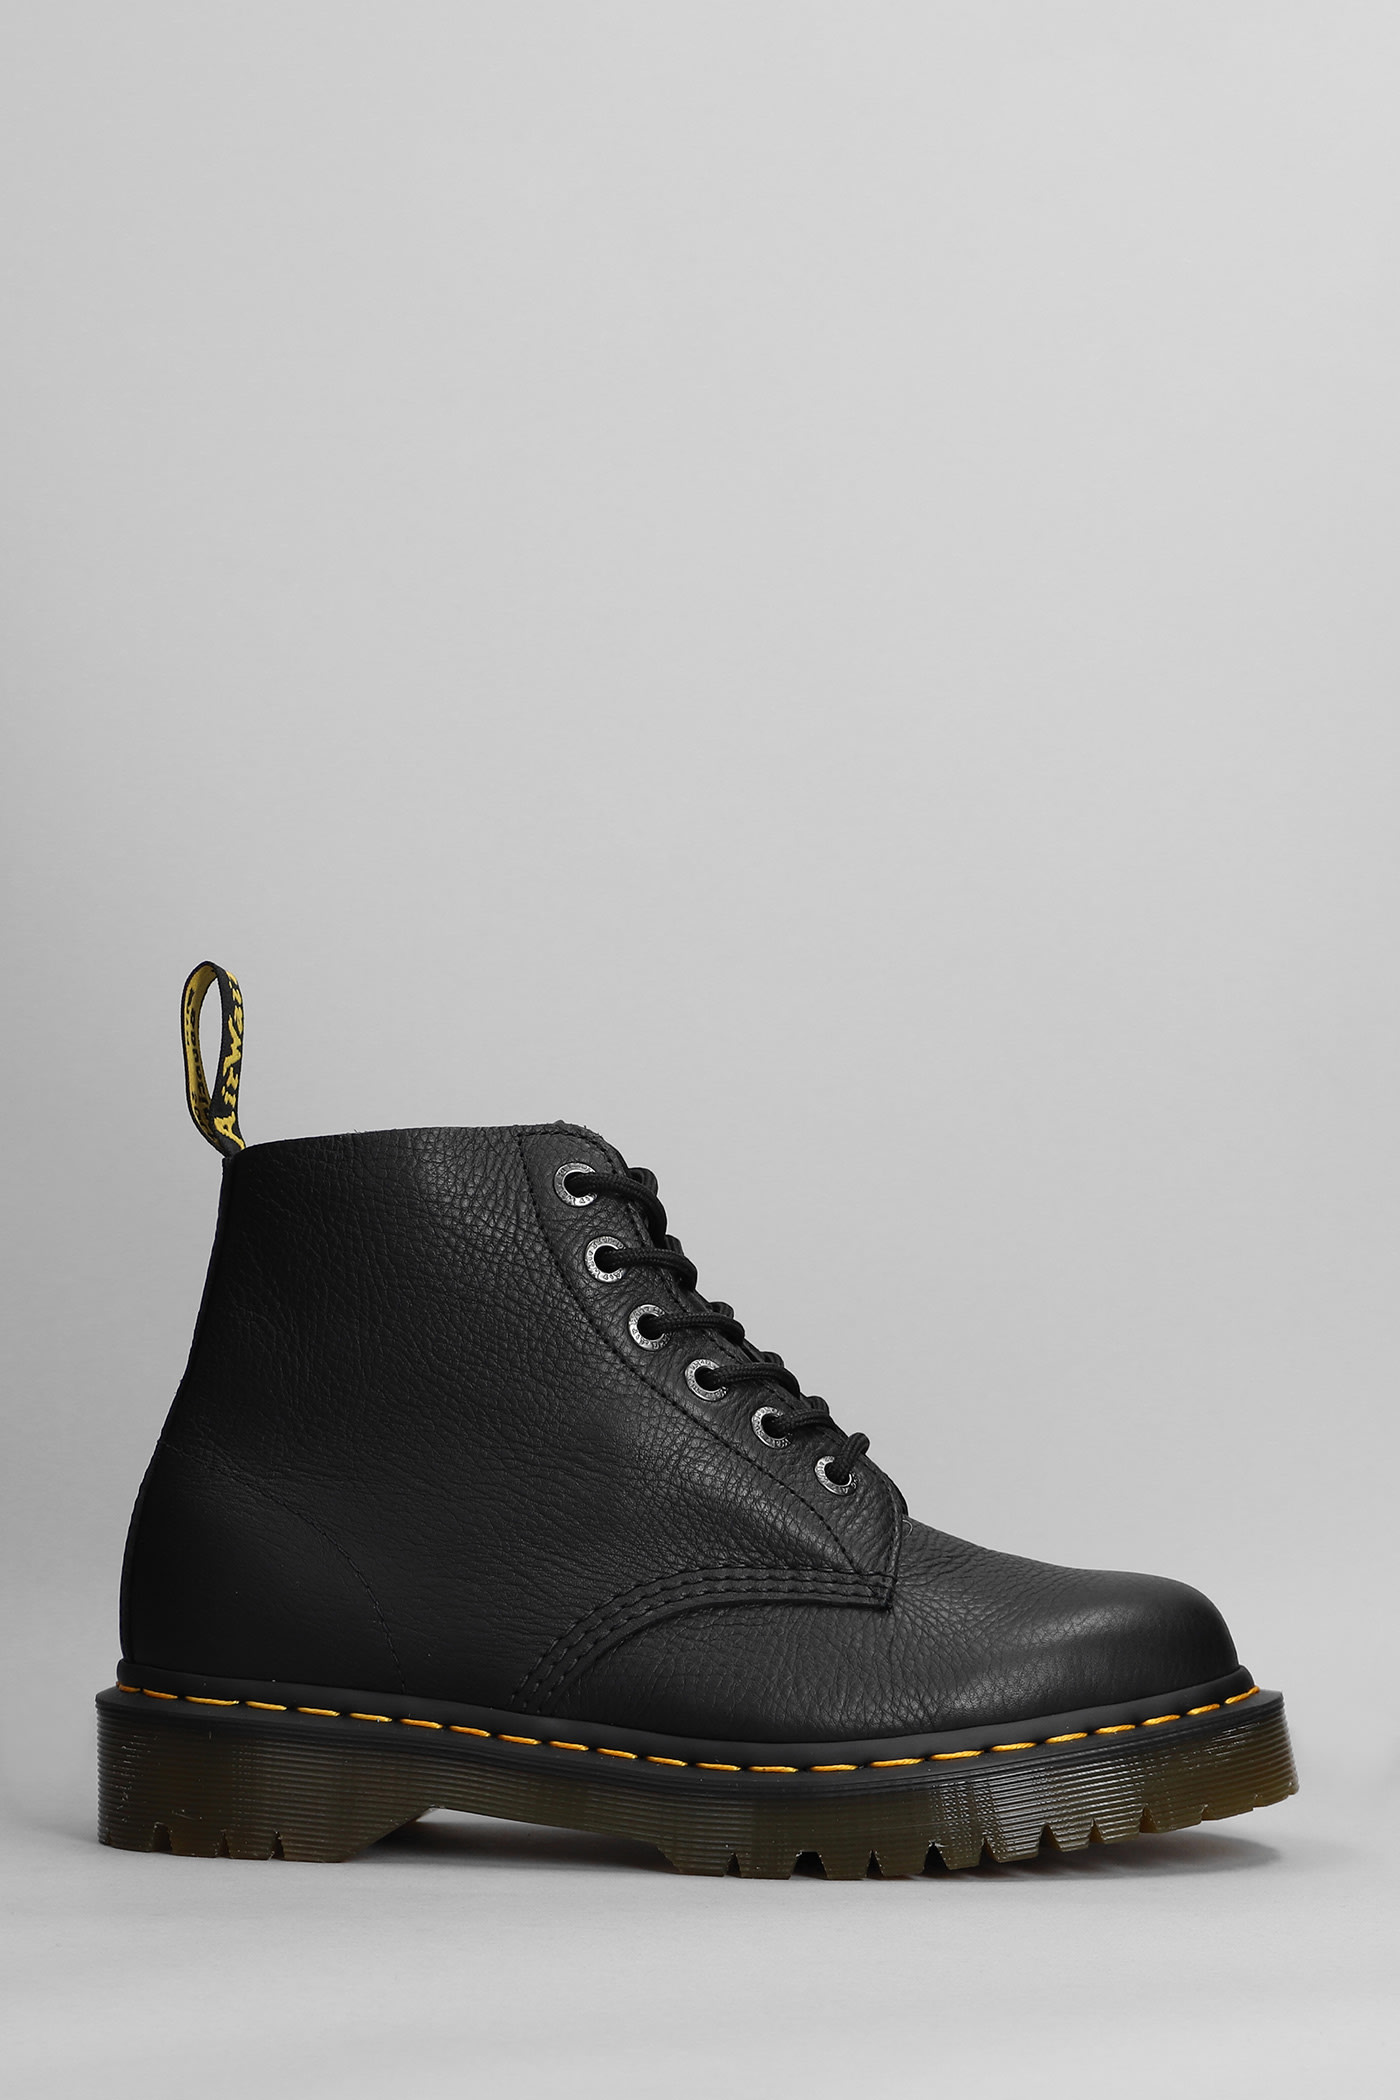 Dr. Martens 101 Ub Bex Combat Boots In Black Leather